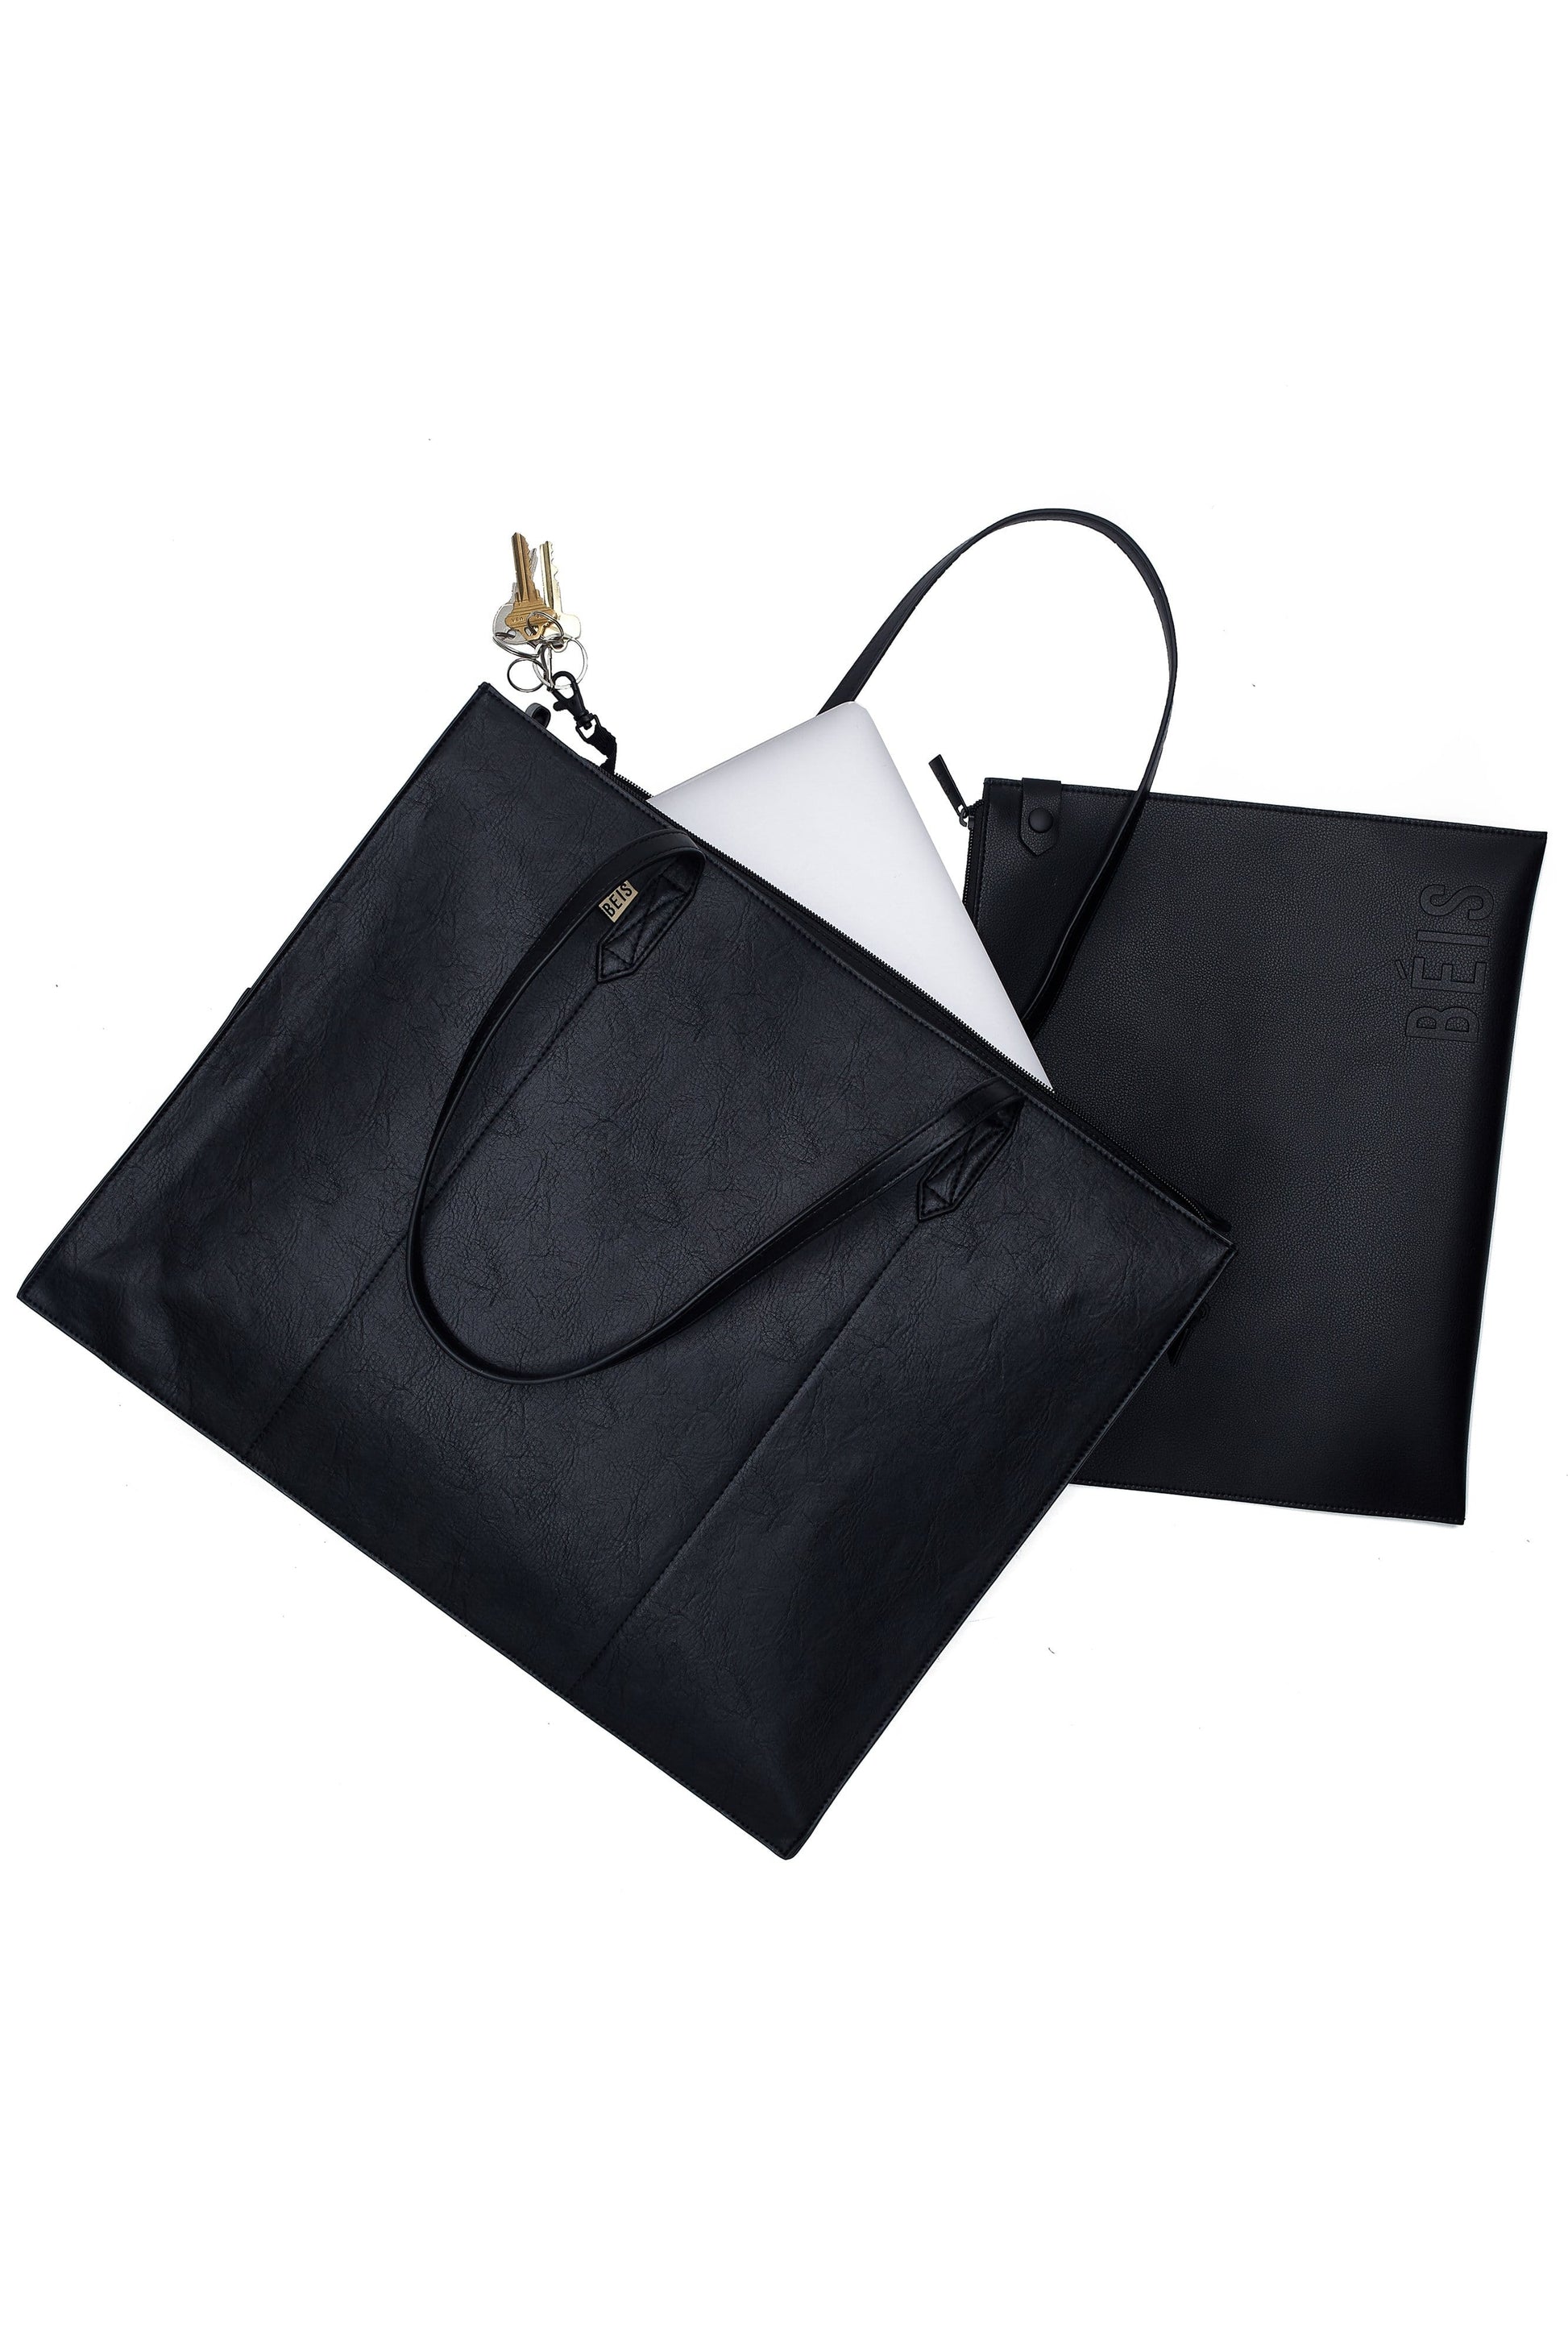 Work Tote Black with Laptop Keys and Removable Pouch